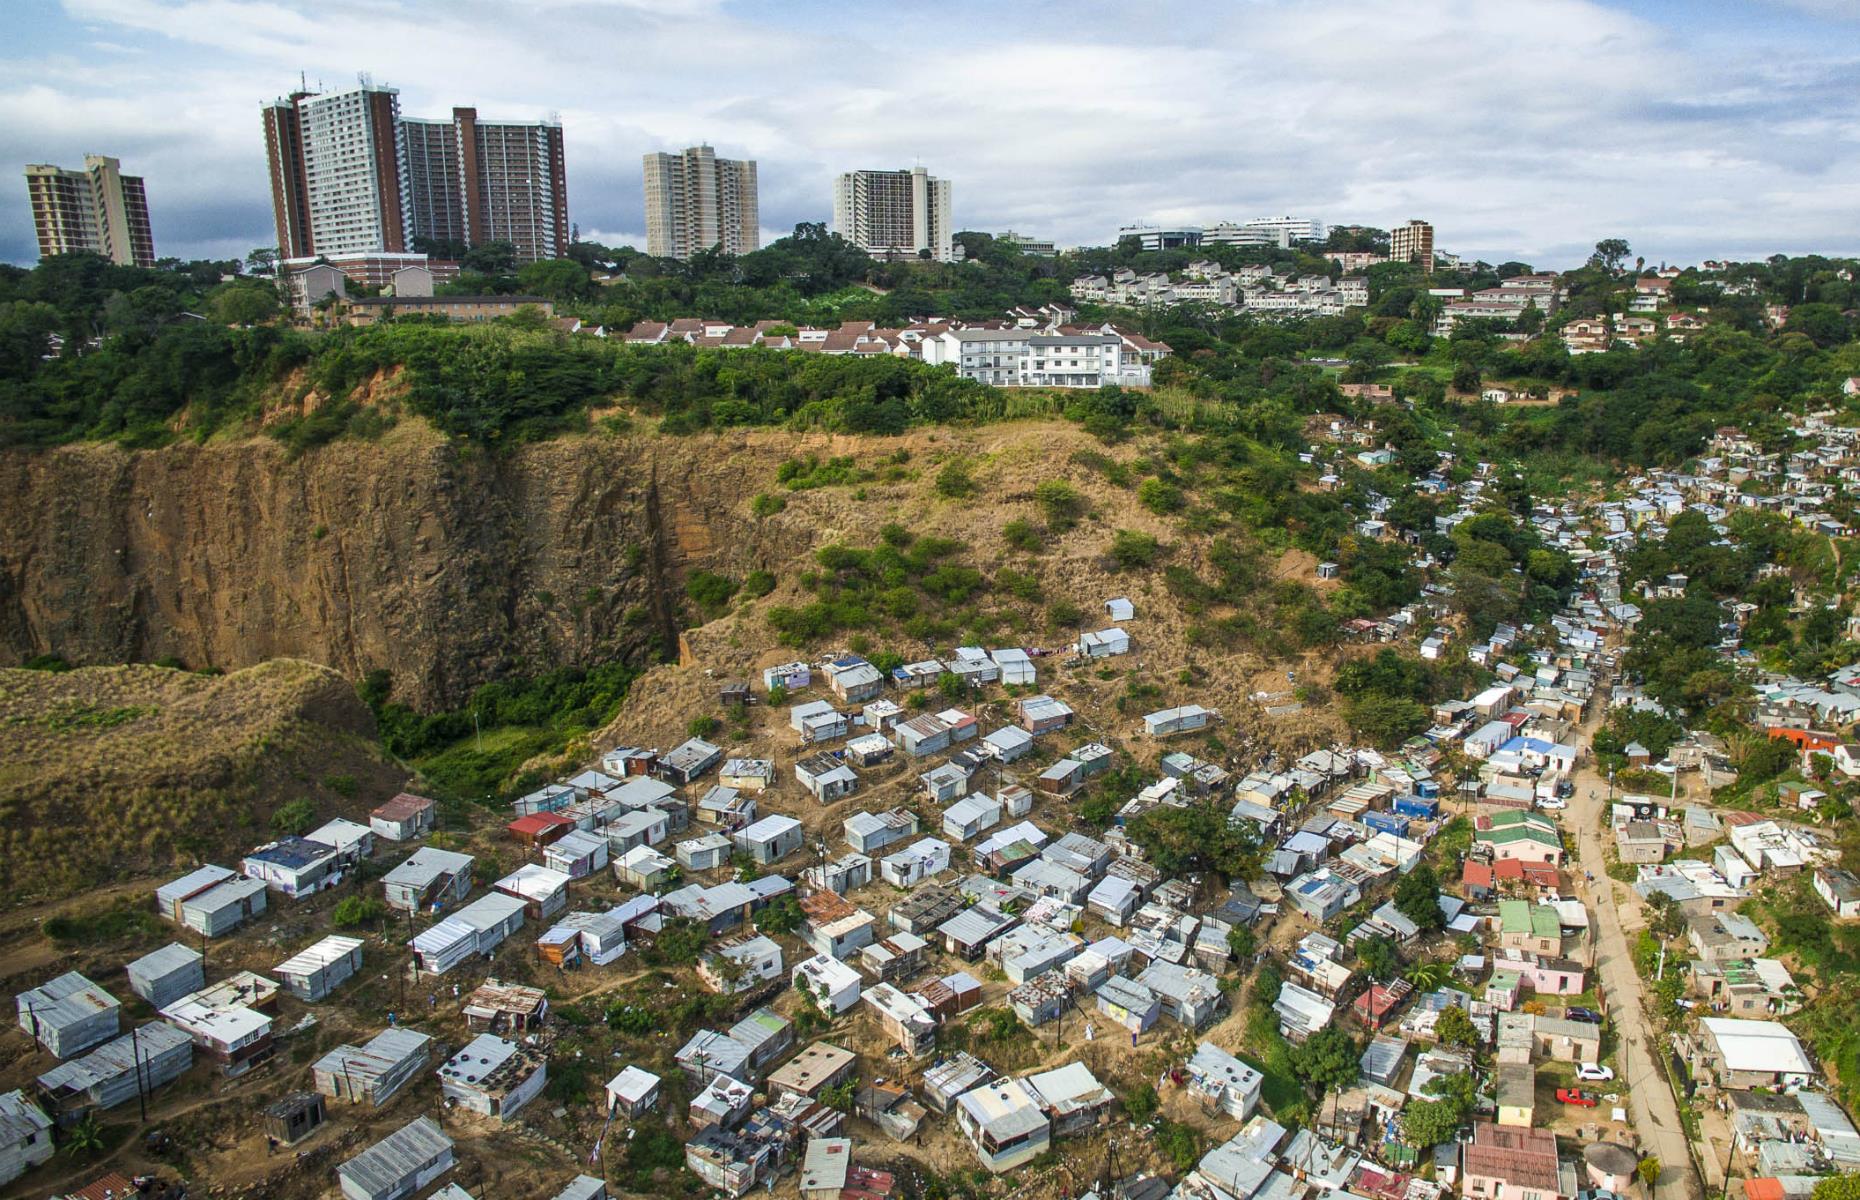 <p>This image shows the road that leads down from Morningside to the Umgeni River, which is lined by shacks. These slums are at risk from poor drainage and torrential rain, as well as the threat of fire, while richer inhabitants sit higher up on the hill, avoiding these concerns.</p>